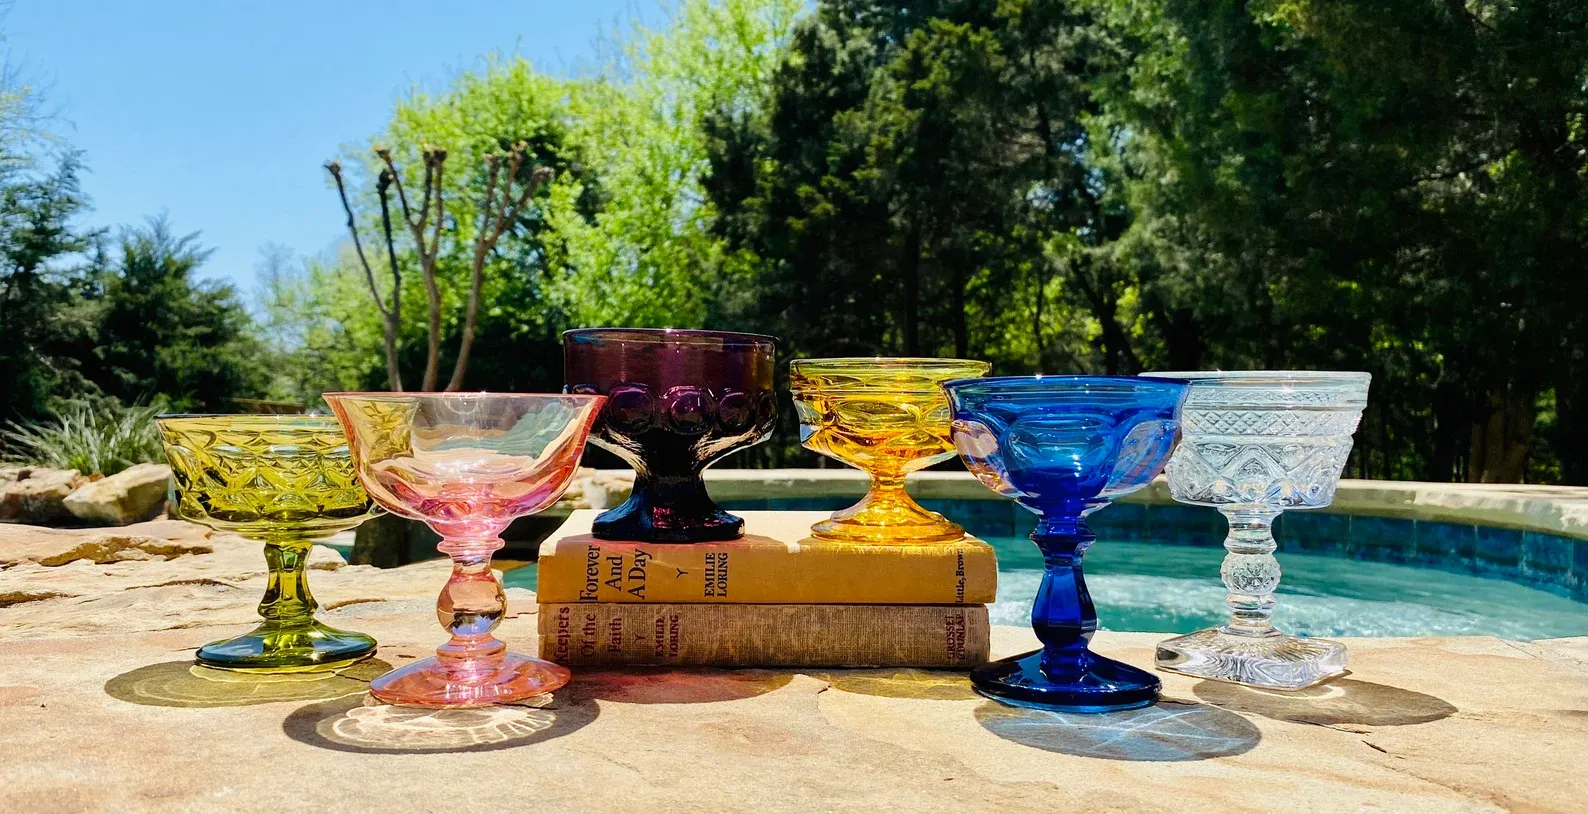 Colored glassware to shop now